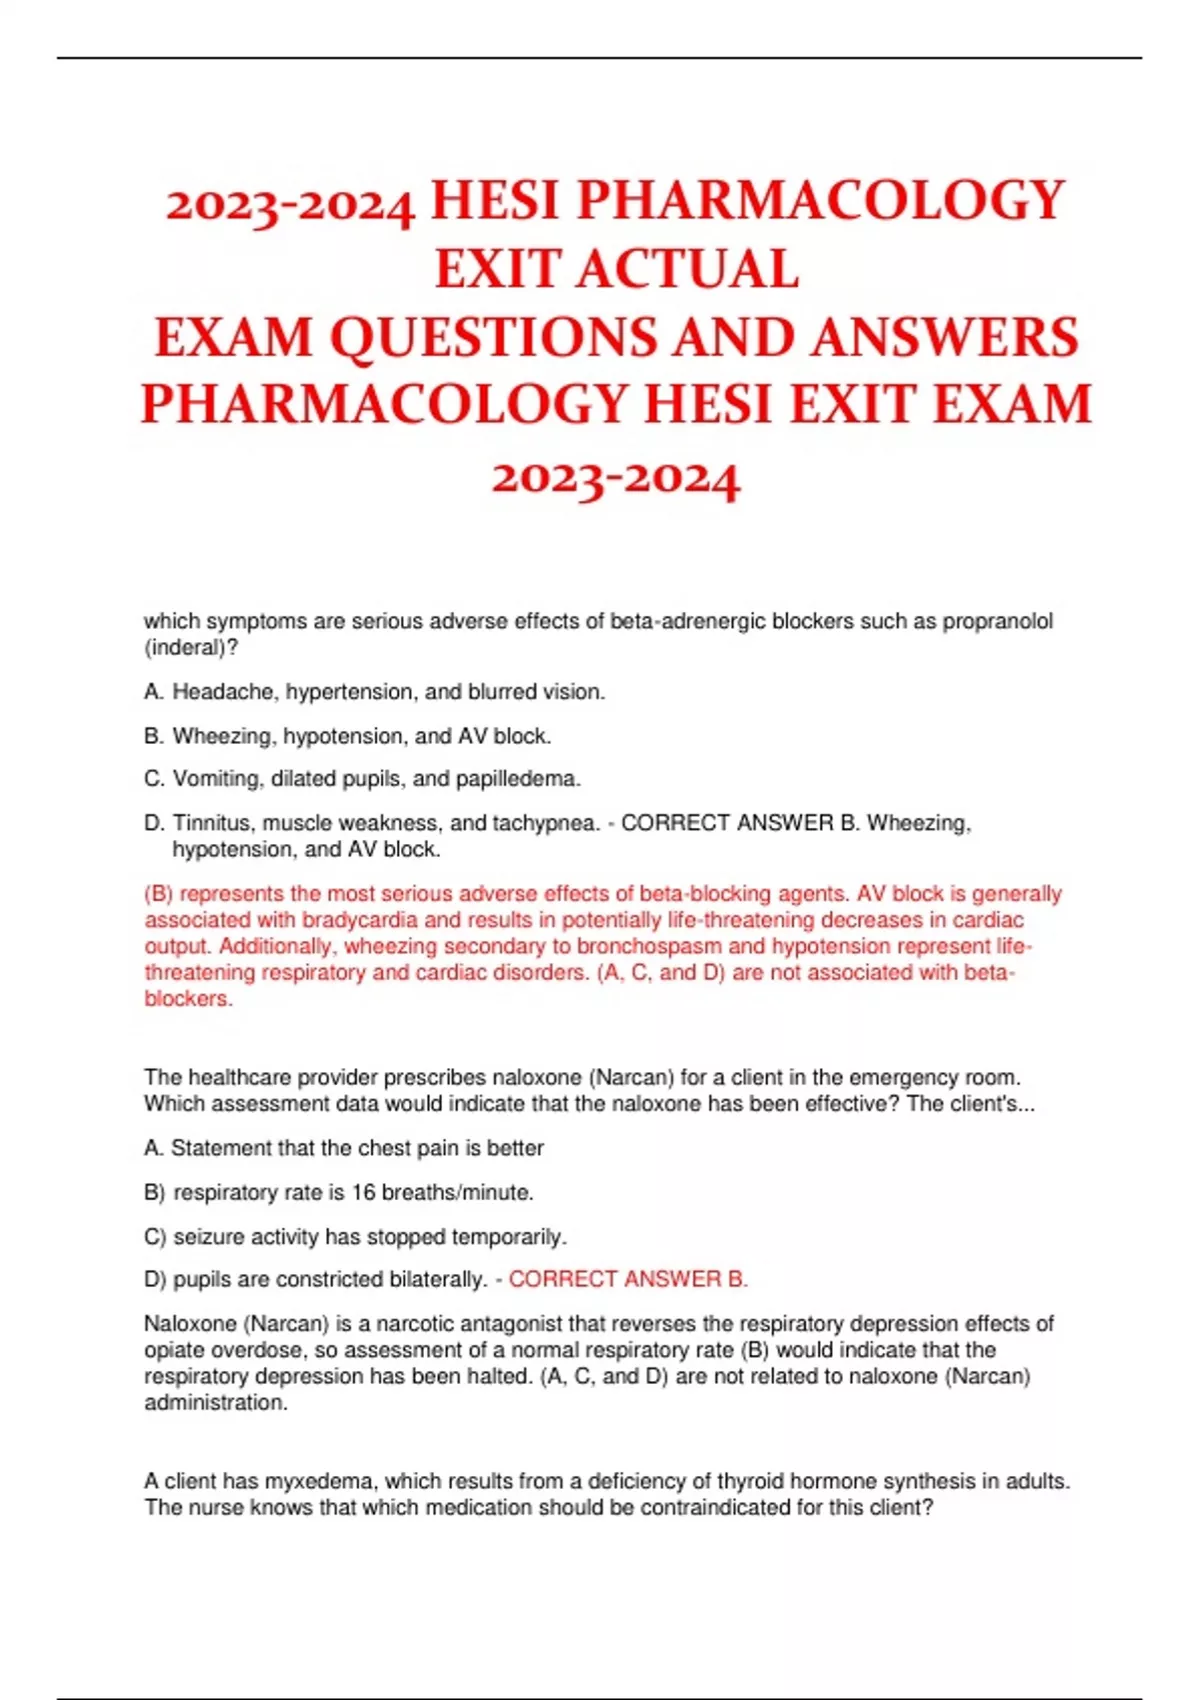 HESI PHARMACOLOGY EXIT ACTUAL EXAM QUESTIONS AND ANSWERS PHARMACOLOGY